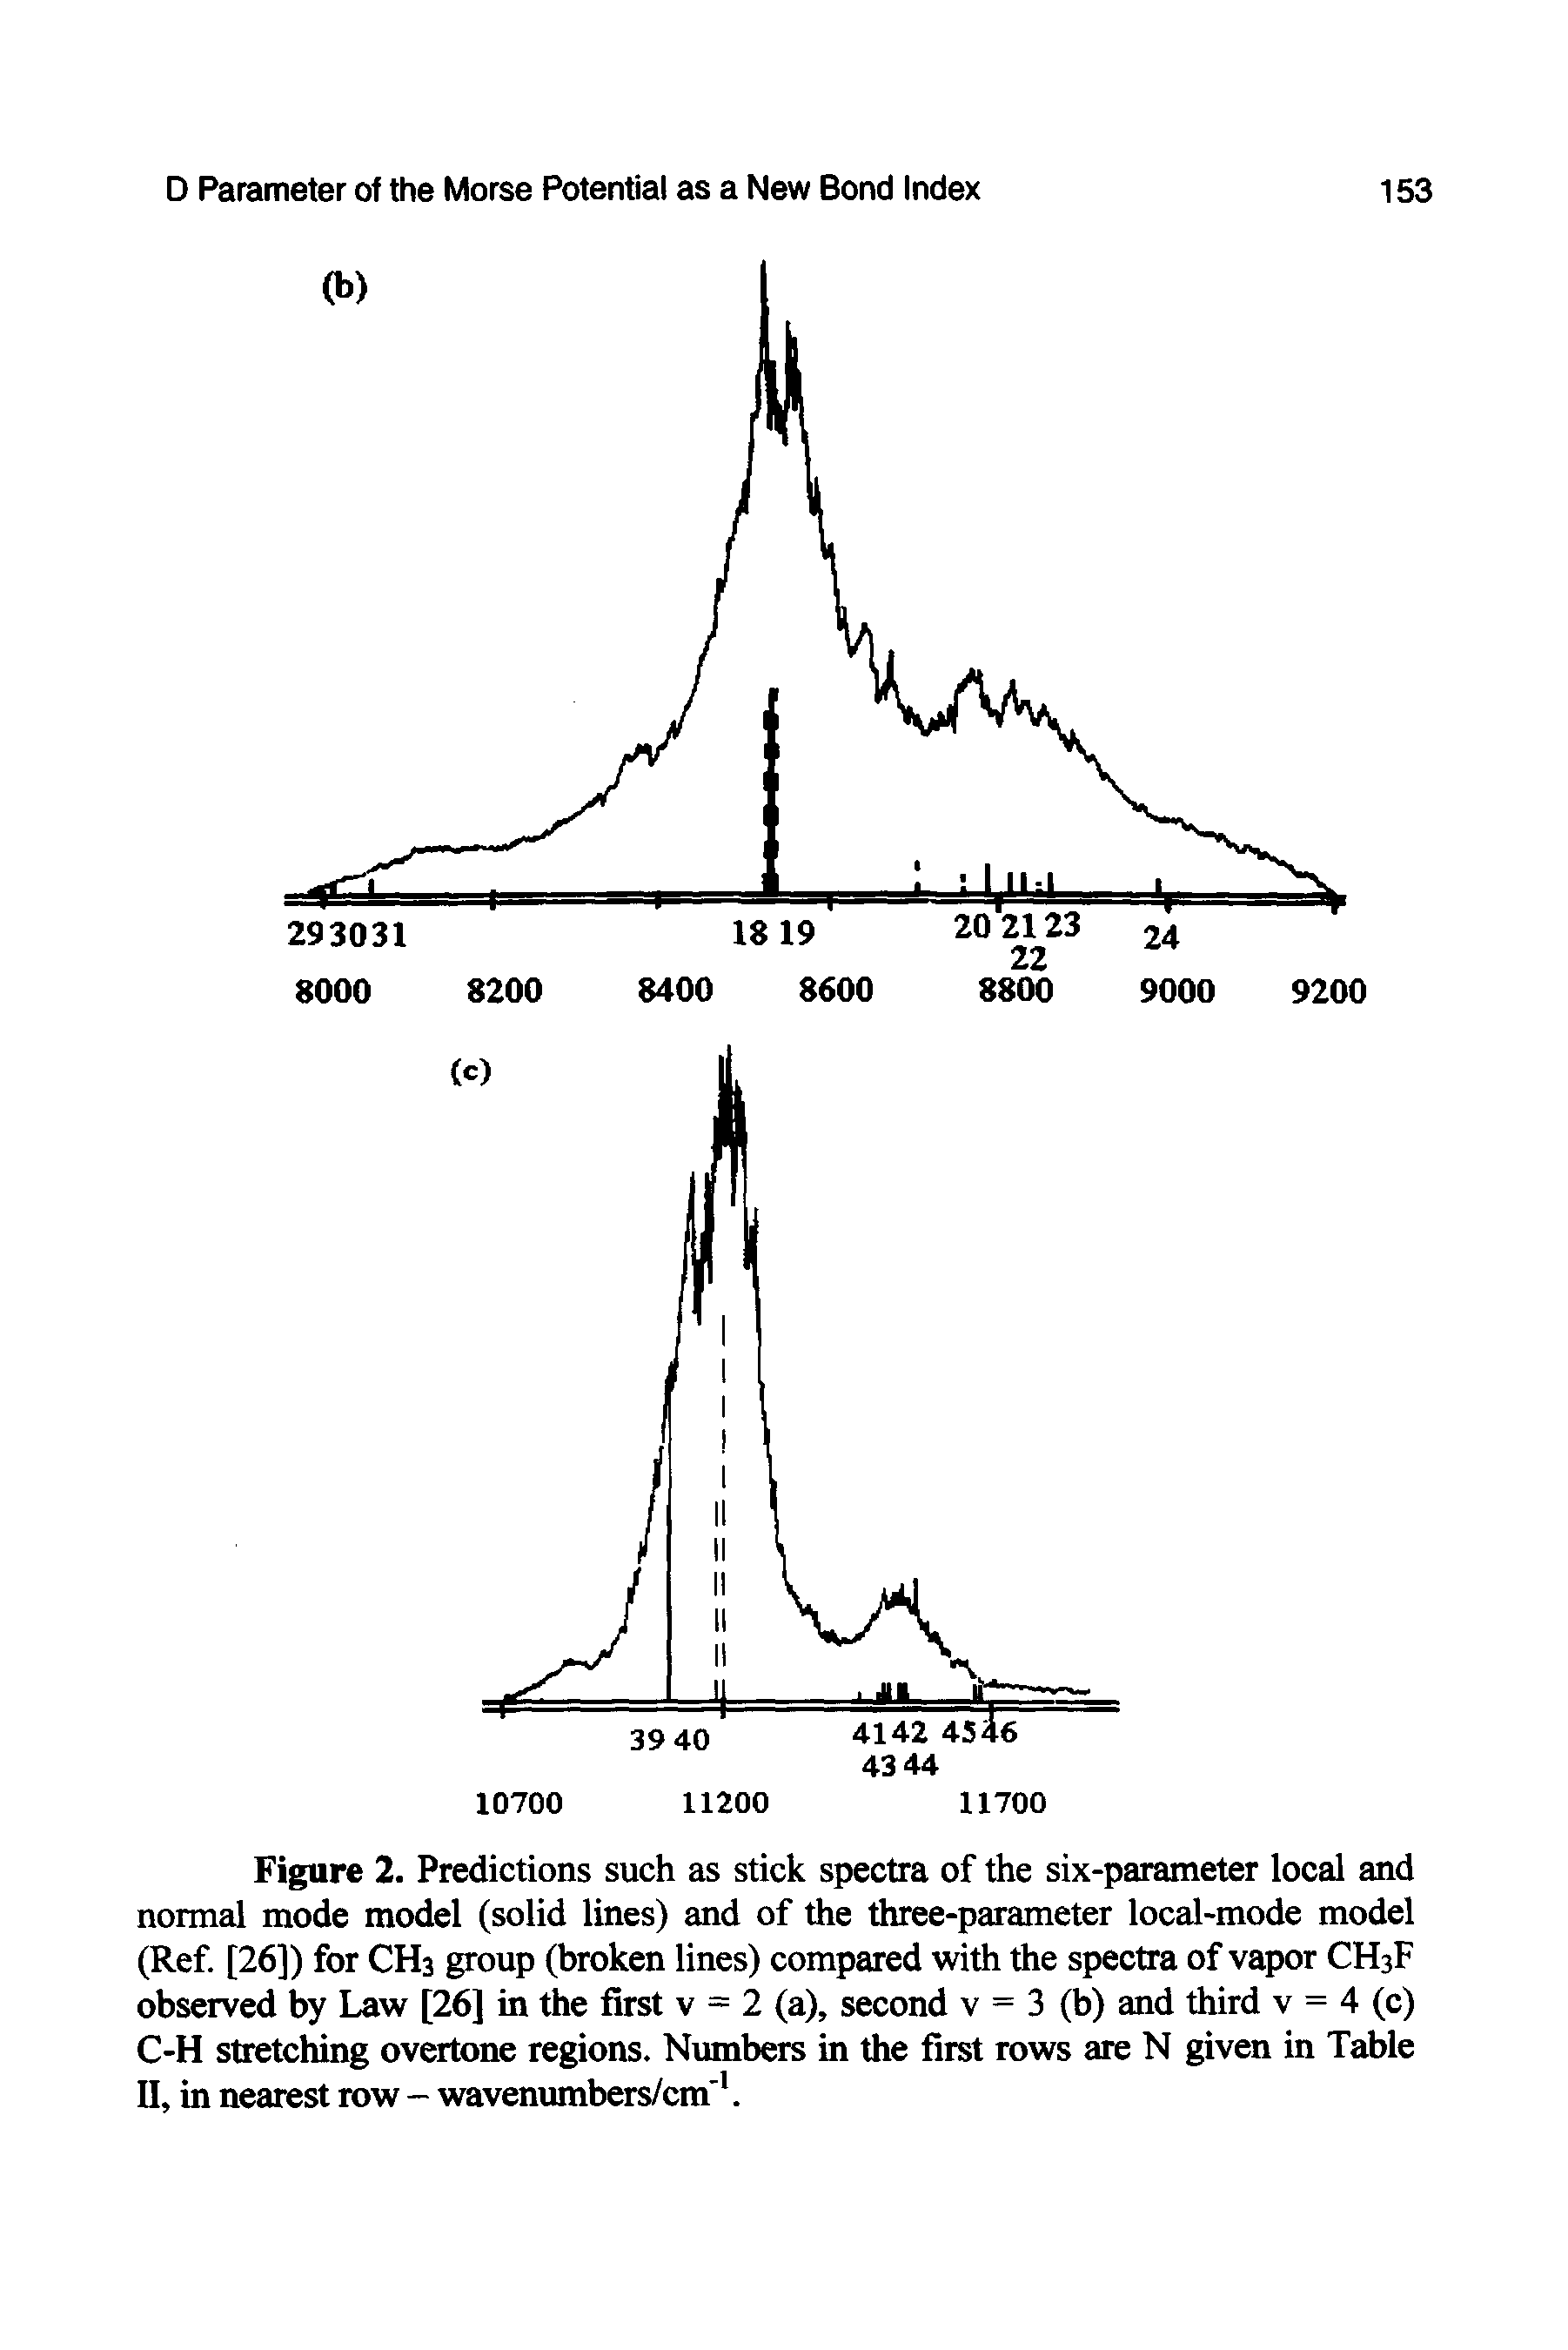 Figure 2. Predictions such as stick spectra of the six-parameter local and normal mode model (solid lines) and of the three-parameter local-mode model (Ref. [26]) for CH3 group (broken lines) compared with the spectra of vapor CH3F observed by Law [26] in the first v = 2 (a), second v = 3 (b) and third v = 4 (c) C-H stretching overtone regions. Numbers in the first rows are N given in Table II, in nearest row - wavenumbers/cm 1.